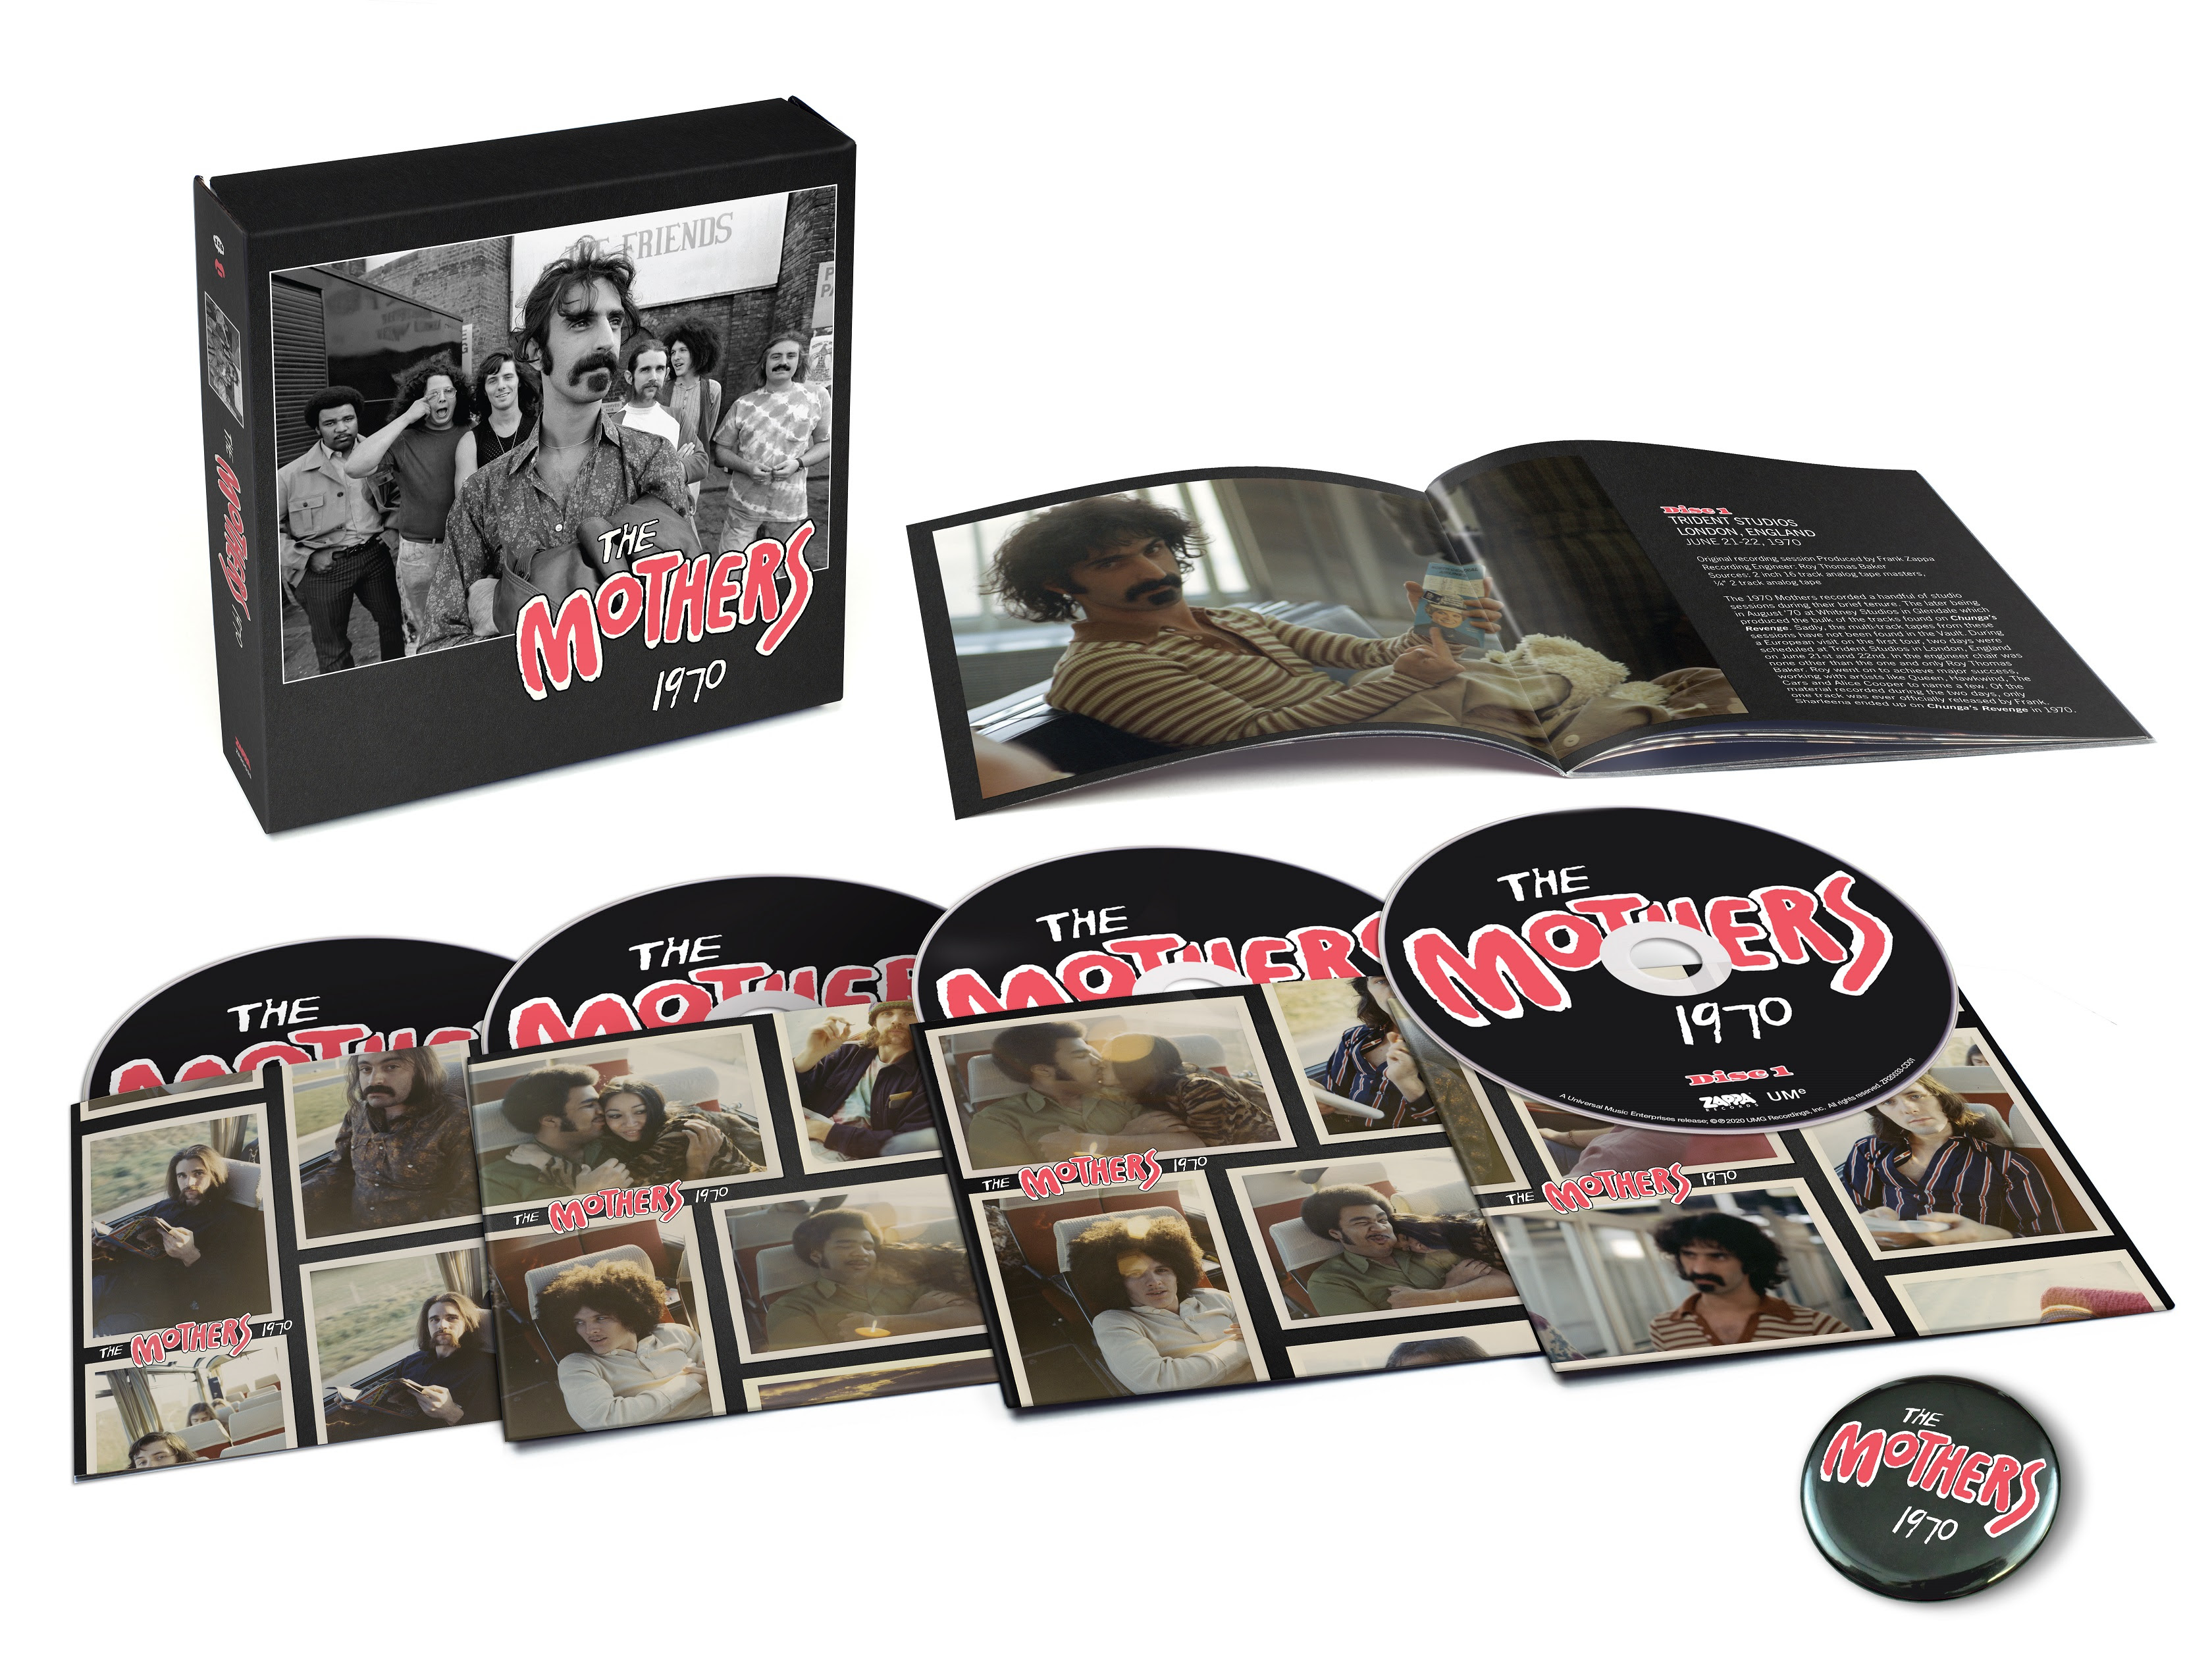 AVAILABLE NOW DIGITALLY AND AS 4-DISC BOX SET VIA ZAPPA RECORDS/UMe